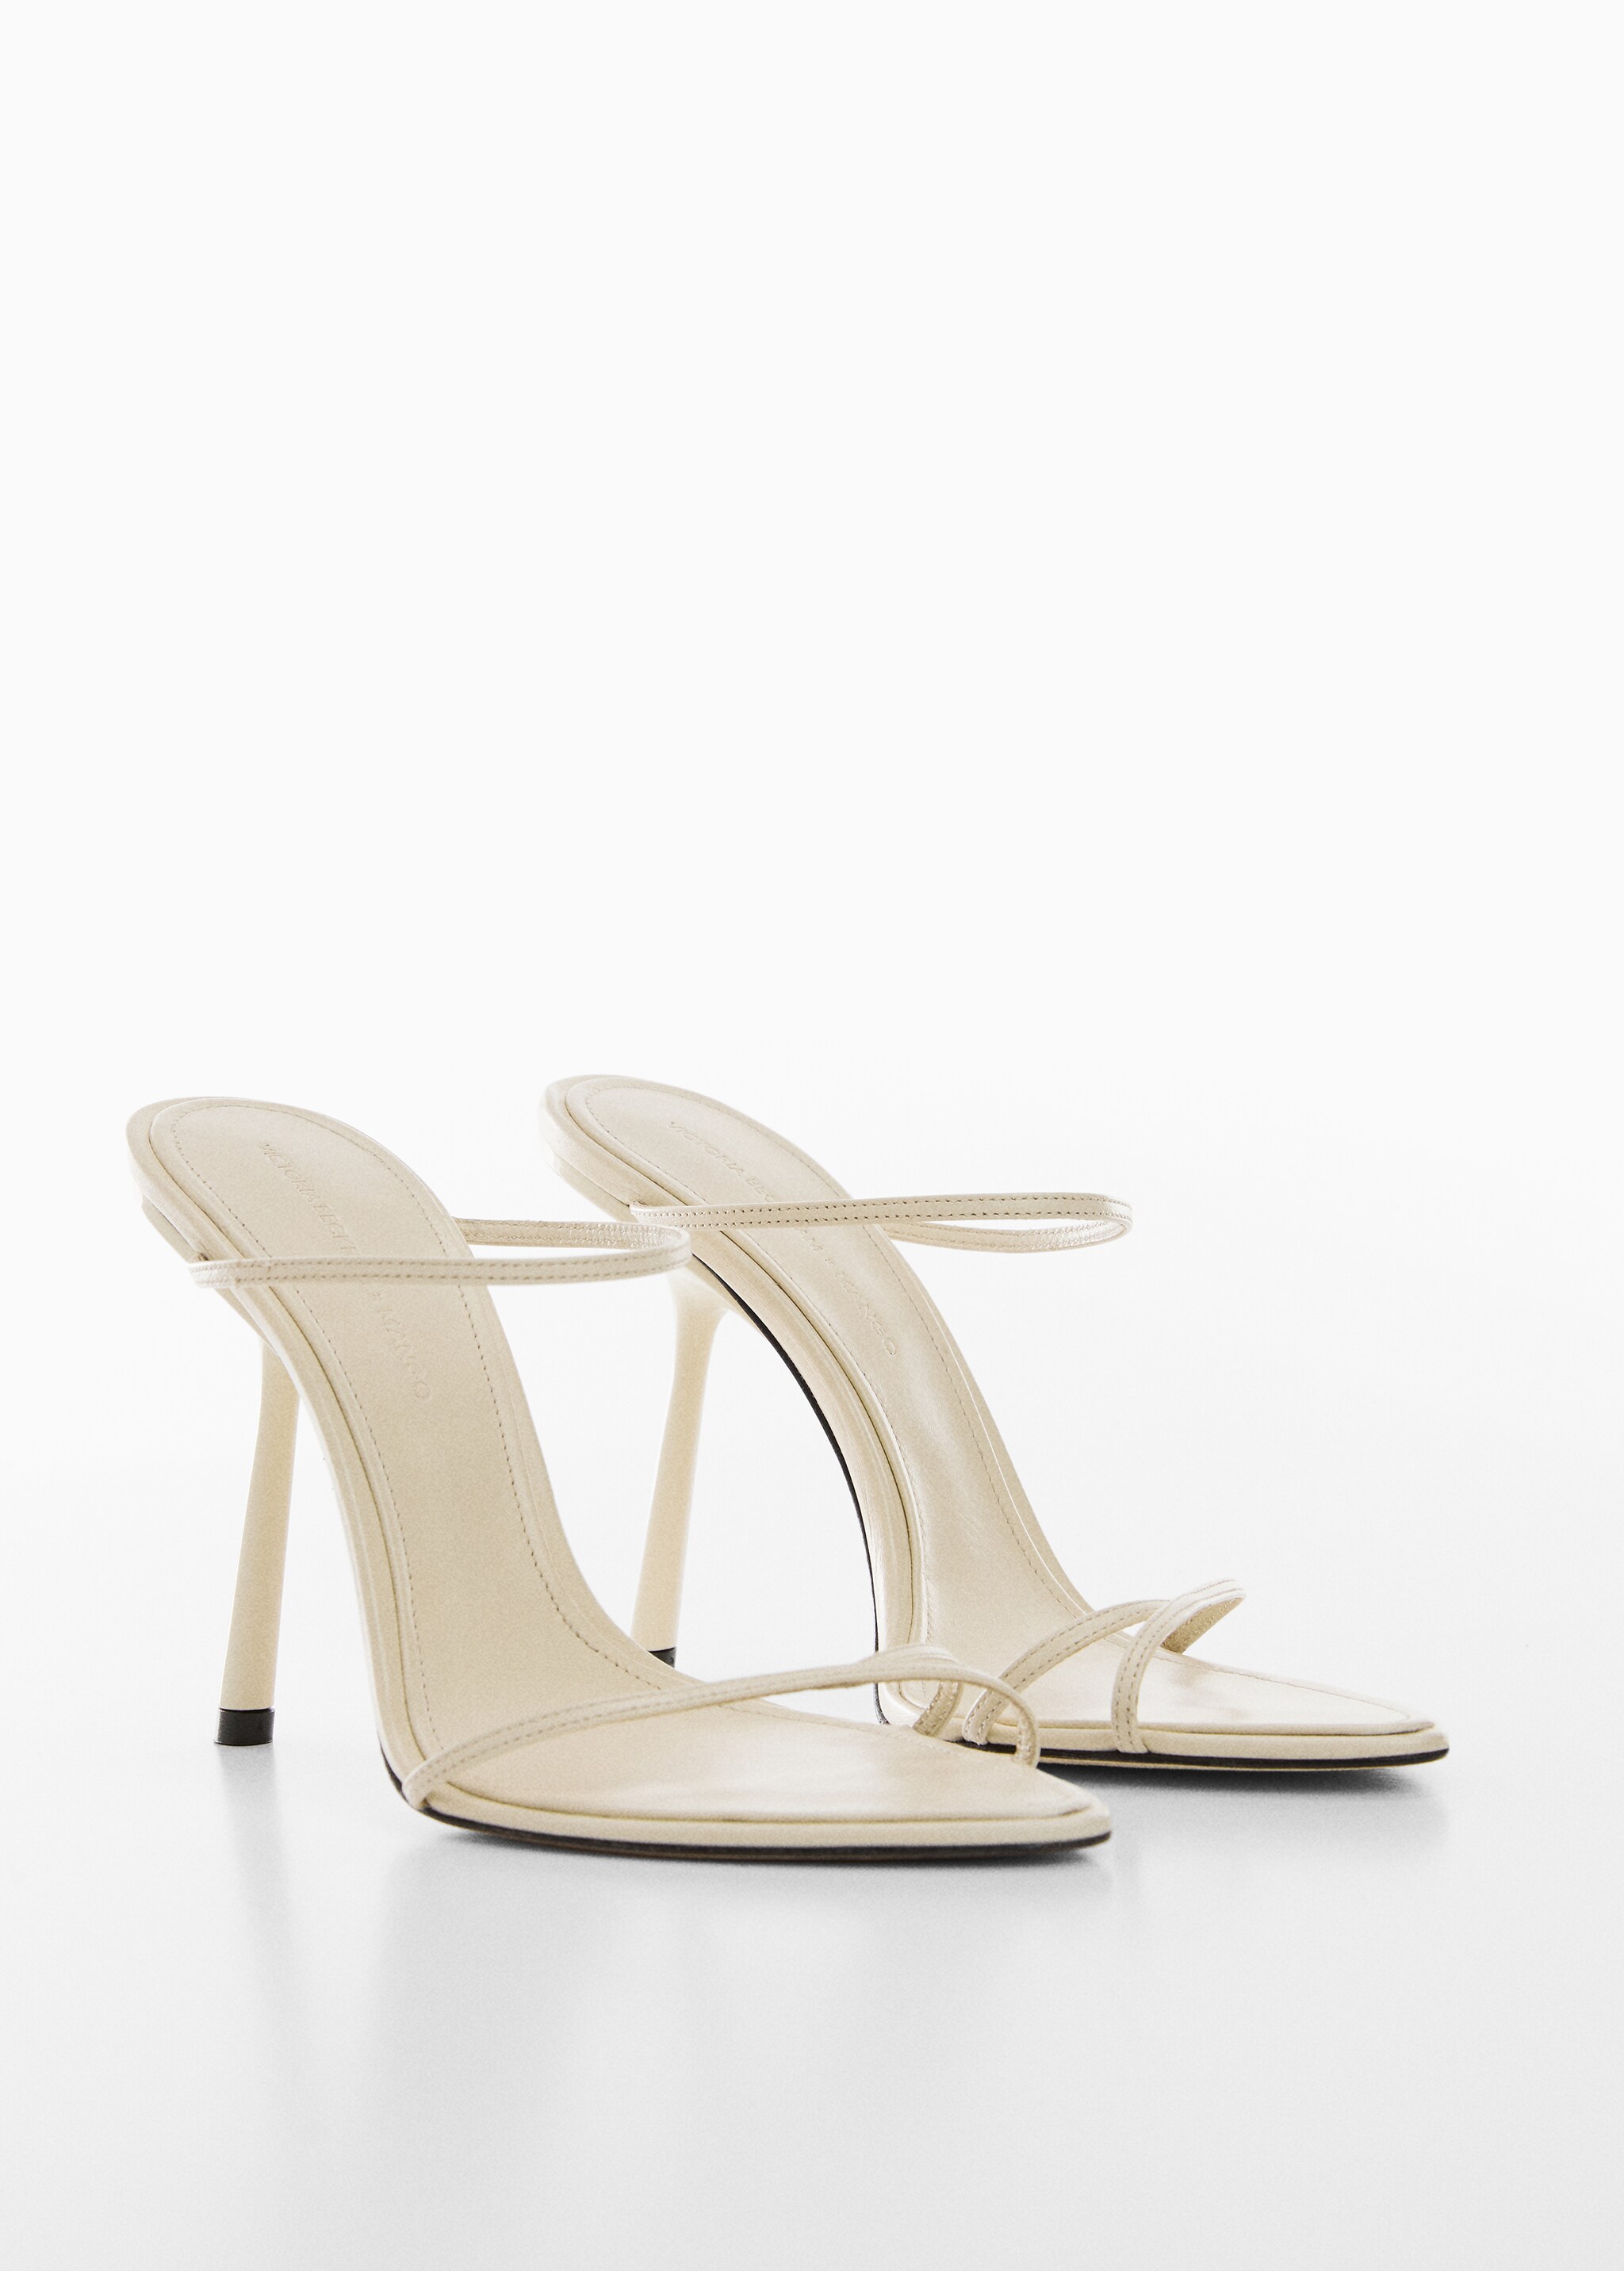 Leather sandal with inclined heel - Medium plane